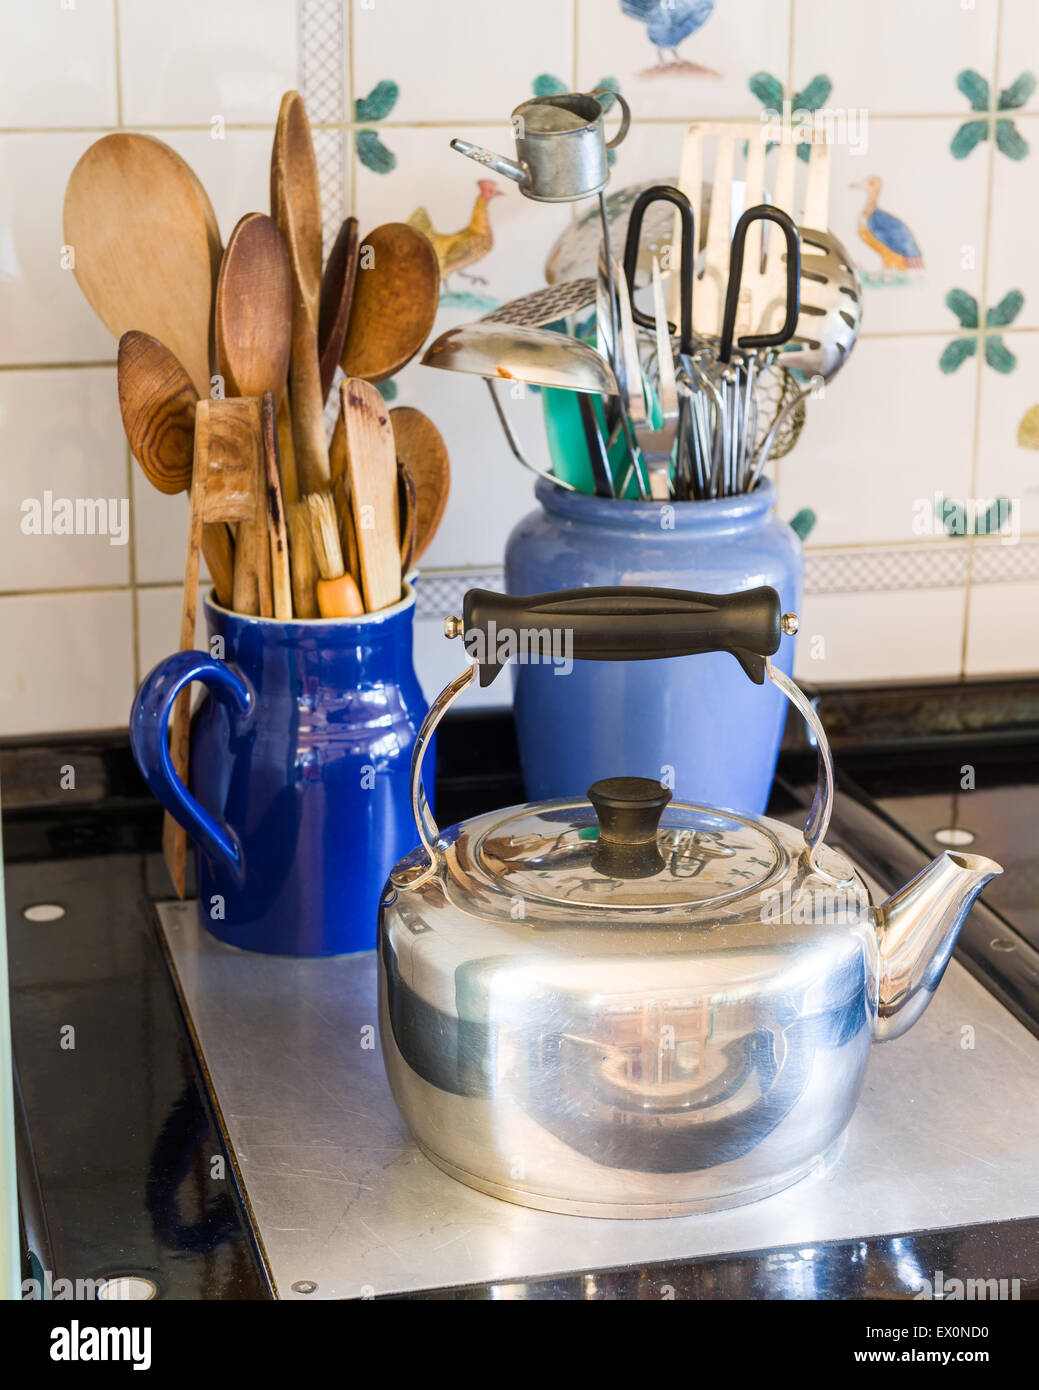 Aga kettle and wooden spoons in blue jug Stock Photo